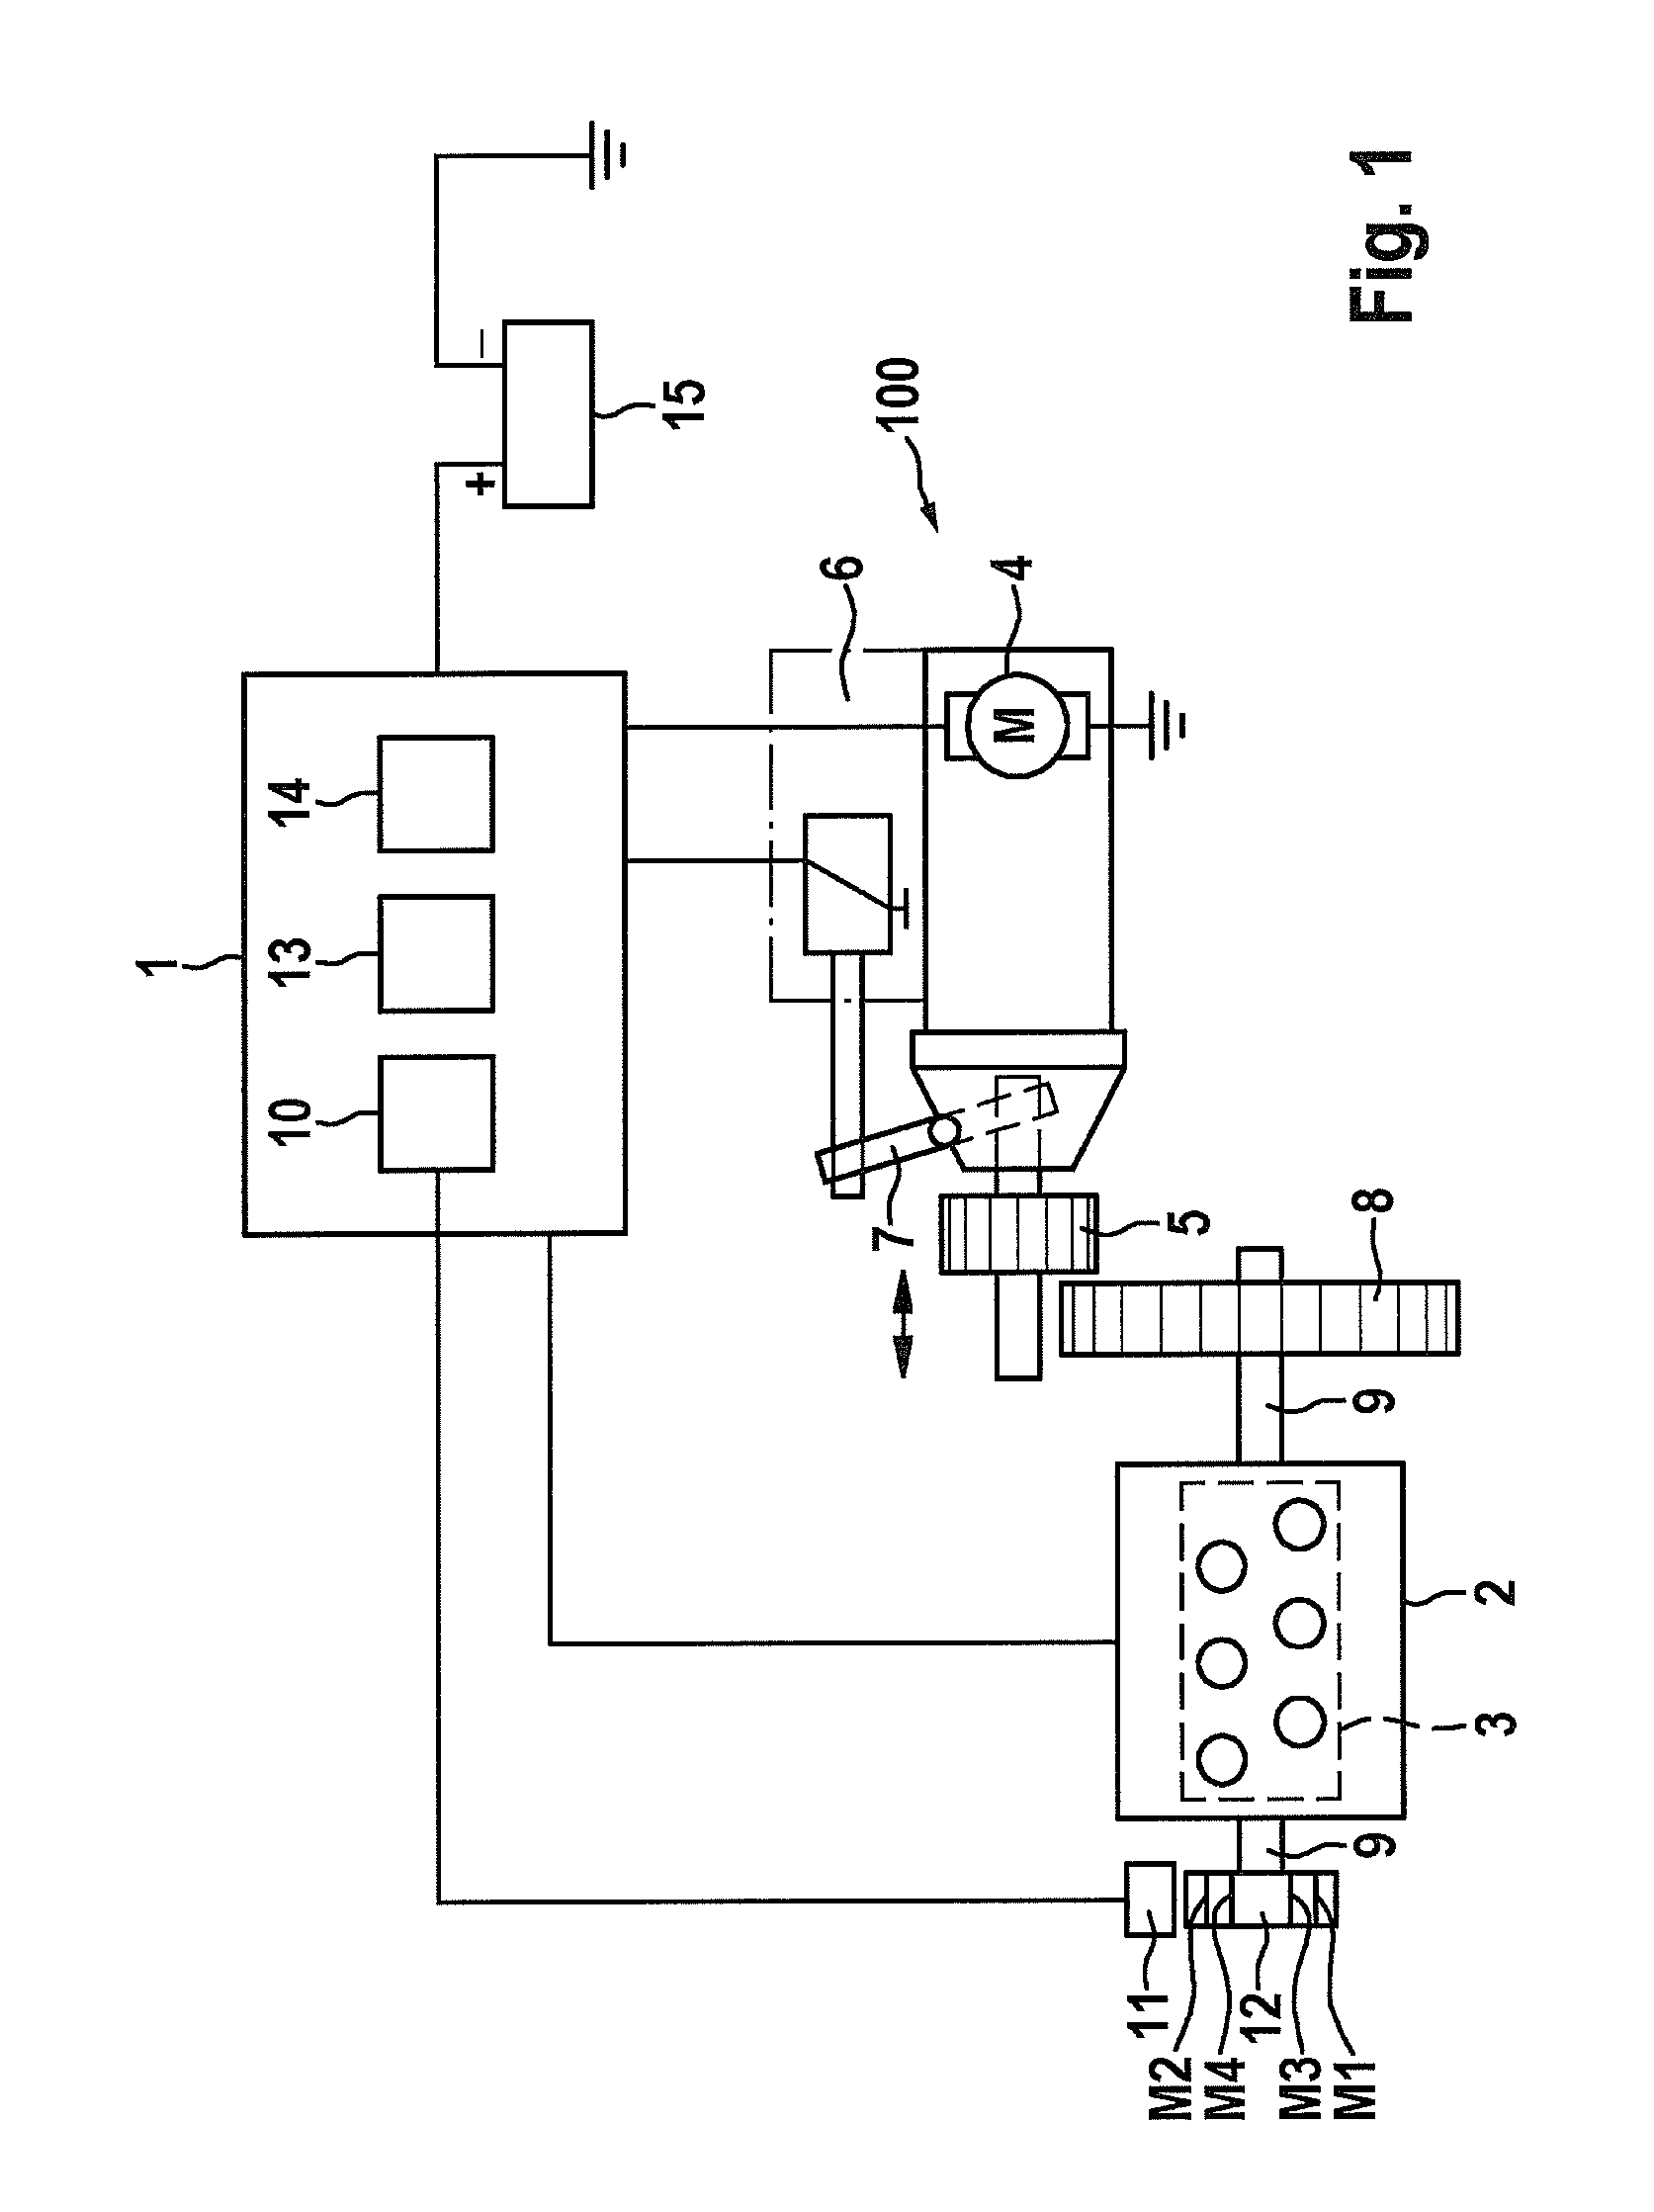 Control system and method for detecting the rotational speed of an internal combustion engine